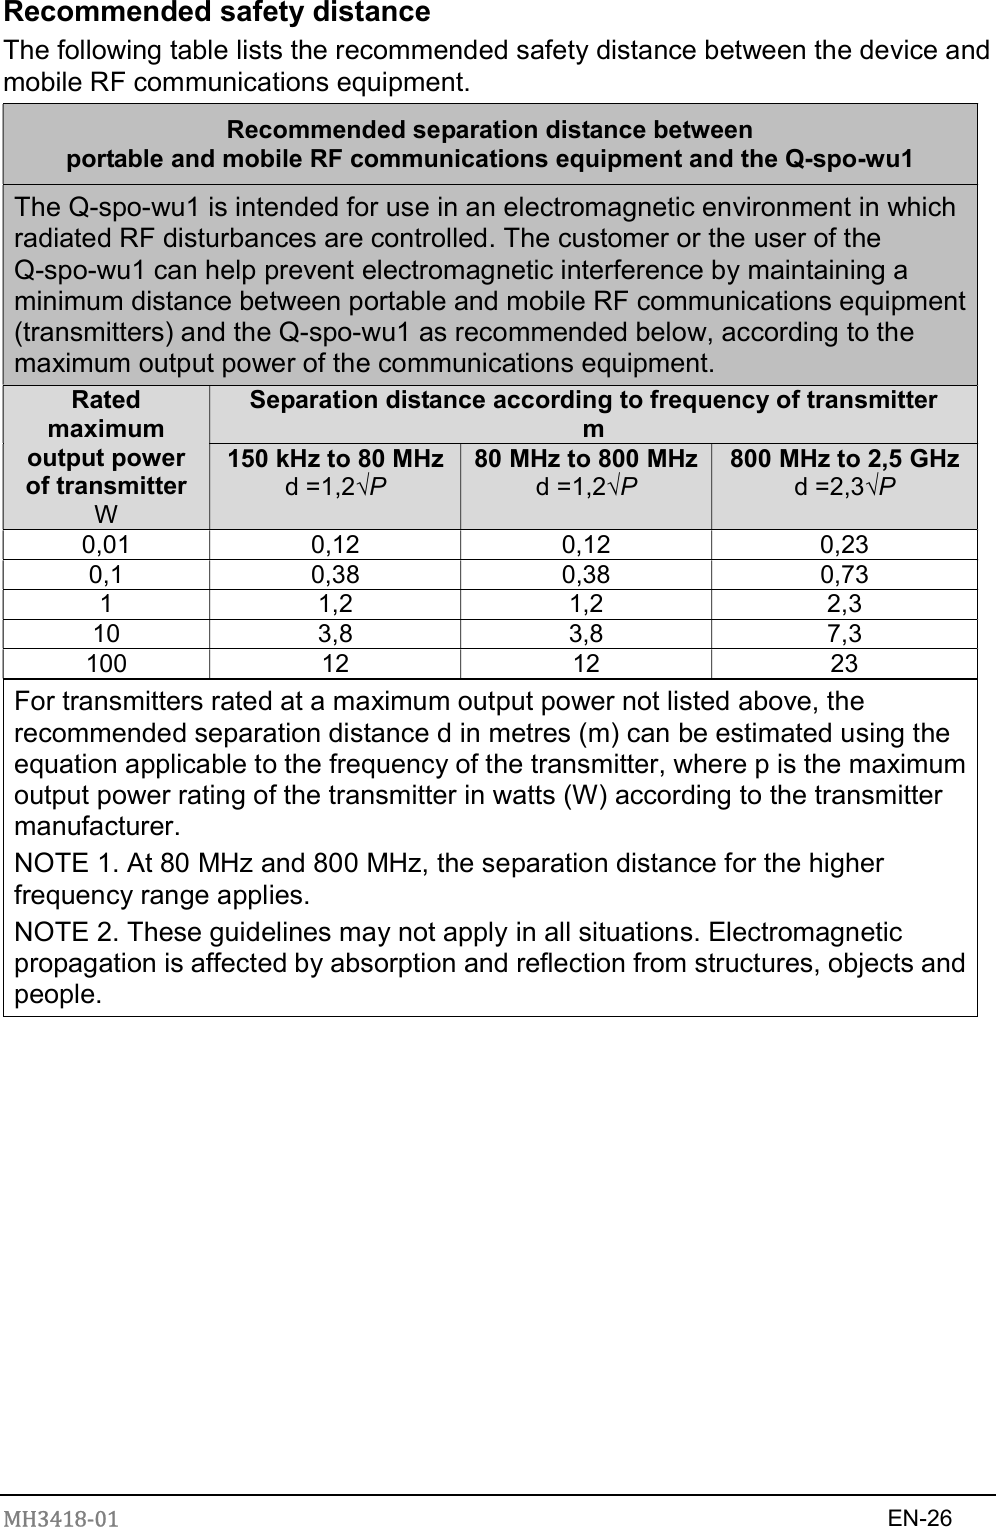 MH3418-01                                                                    EN-26  Recommended safety distance The following table lists the recommended safety distance between the device and mobile RF communications equipment. Recommended separation distance between portable and mobile RF communications equipment and the Q-spo-wu1 The Q-spo-wu1 is intended for use in an electromagnetic environment in which radiated RF disturbances are controlled. The customer or the user of the Q-spo-wu1 can help prevent electromagnetic interference by maintaining a minimum distance between portable and mobile RF communications equipment (transmitters) and the Q-spo-wu1 as recommended below, according to the maximum output power of the communications equipment. Rated maximum output power of transmitter W Separation distance according to frequency of transmitter m 150 kHz to 80 MHz d =1,2√P 80 MHz to 800 MHz d =1,2√P 800 MHz to 2,5 GHz d =2,3√P 0,01  0,12  0,12  0,23 0,1  0,38  0,38  0,73 1  1,2  1,2  2,3 10  3,8  3,8  7,3 100  12  12  23 For transmitters rated at a maximum output power not listed above, the recommended separation distance d in metres (m) can be estimated using the equation applicable to the frequency of the transmitter, where p is the maximum output power rating of the transmitter in watts (W) according to the transmitter manufacturer. NOTE 1. At 80 MHz and 800 MHz, the separation distance for the higher frequency range applies. NOTE 2. These guidelines may not apply in all situations. Electromagnetic propagation is affected by absorption and reflection from structures, objects and people.           